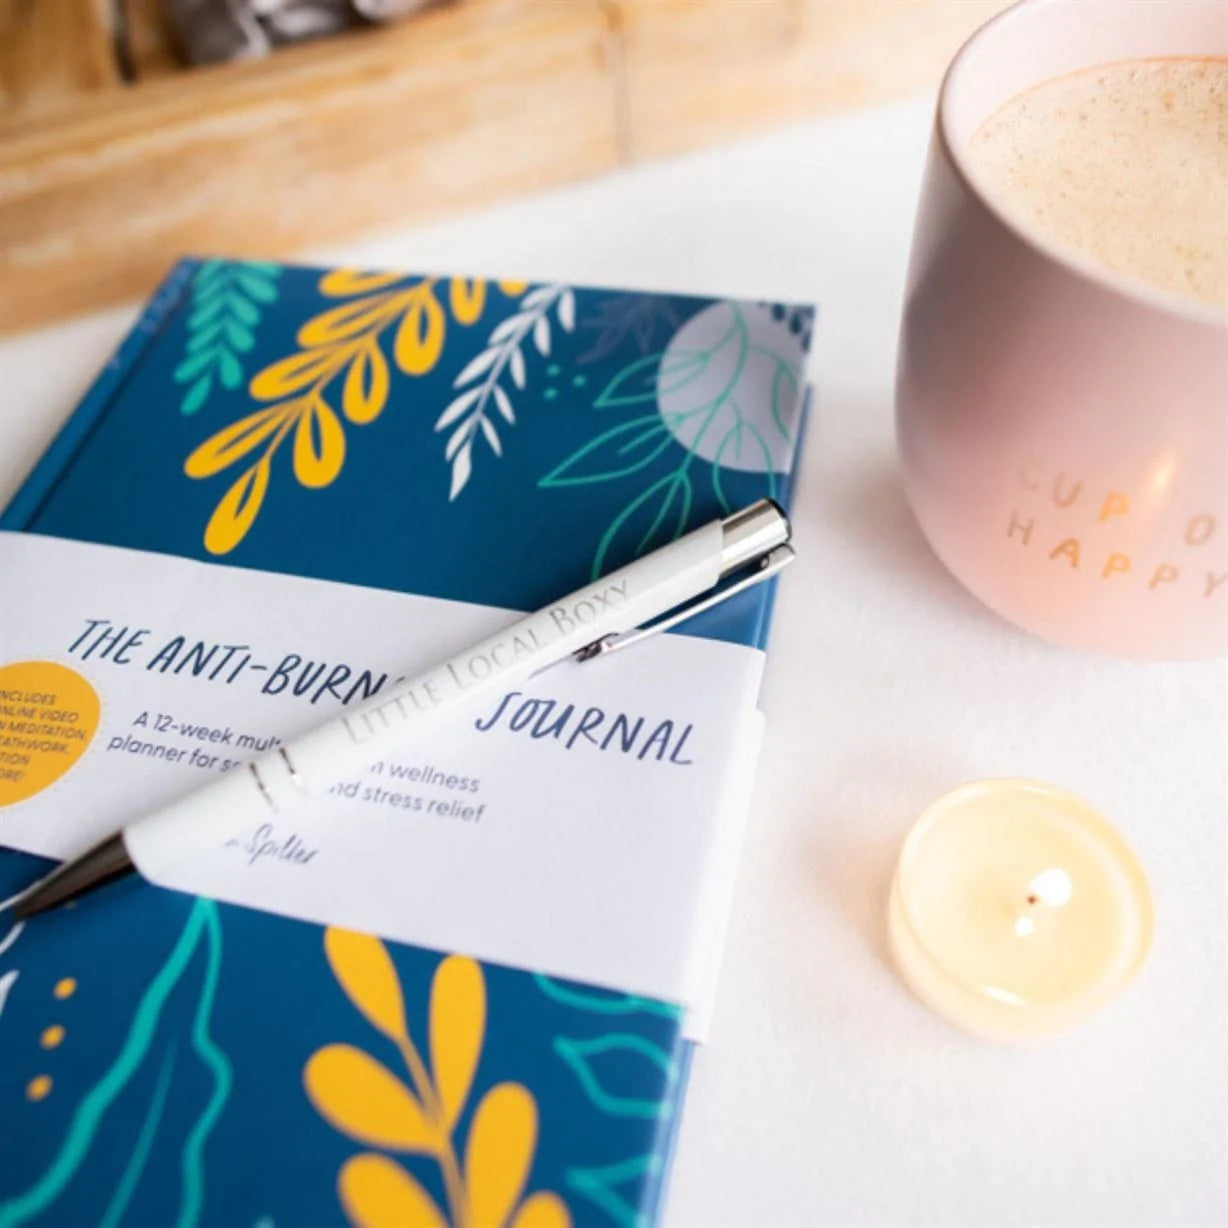 Our Bookshelf Print Books The Anti-Burnout Journal: A 12-week multi-platform wellness planner for self-care and stress relief - Hardcover